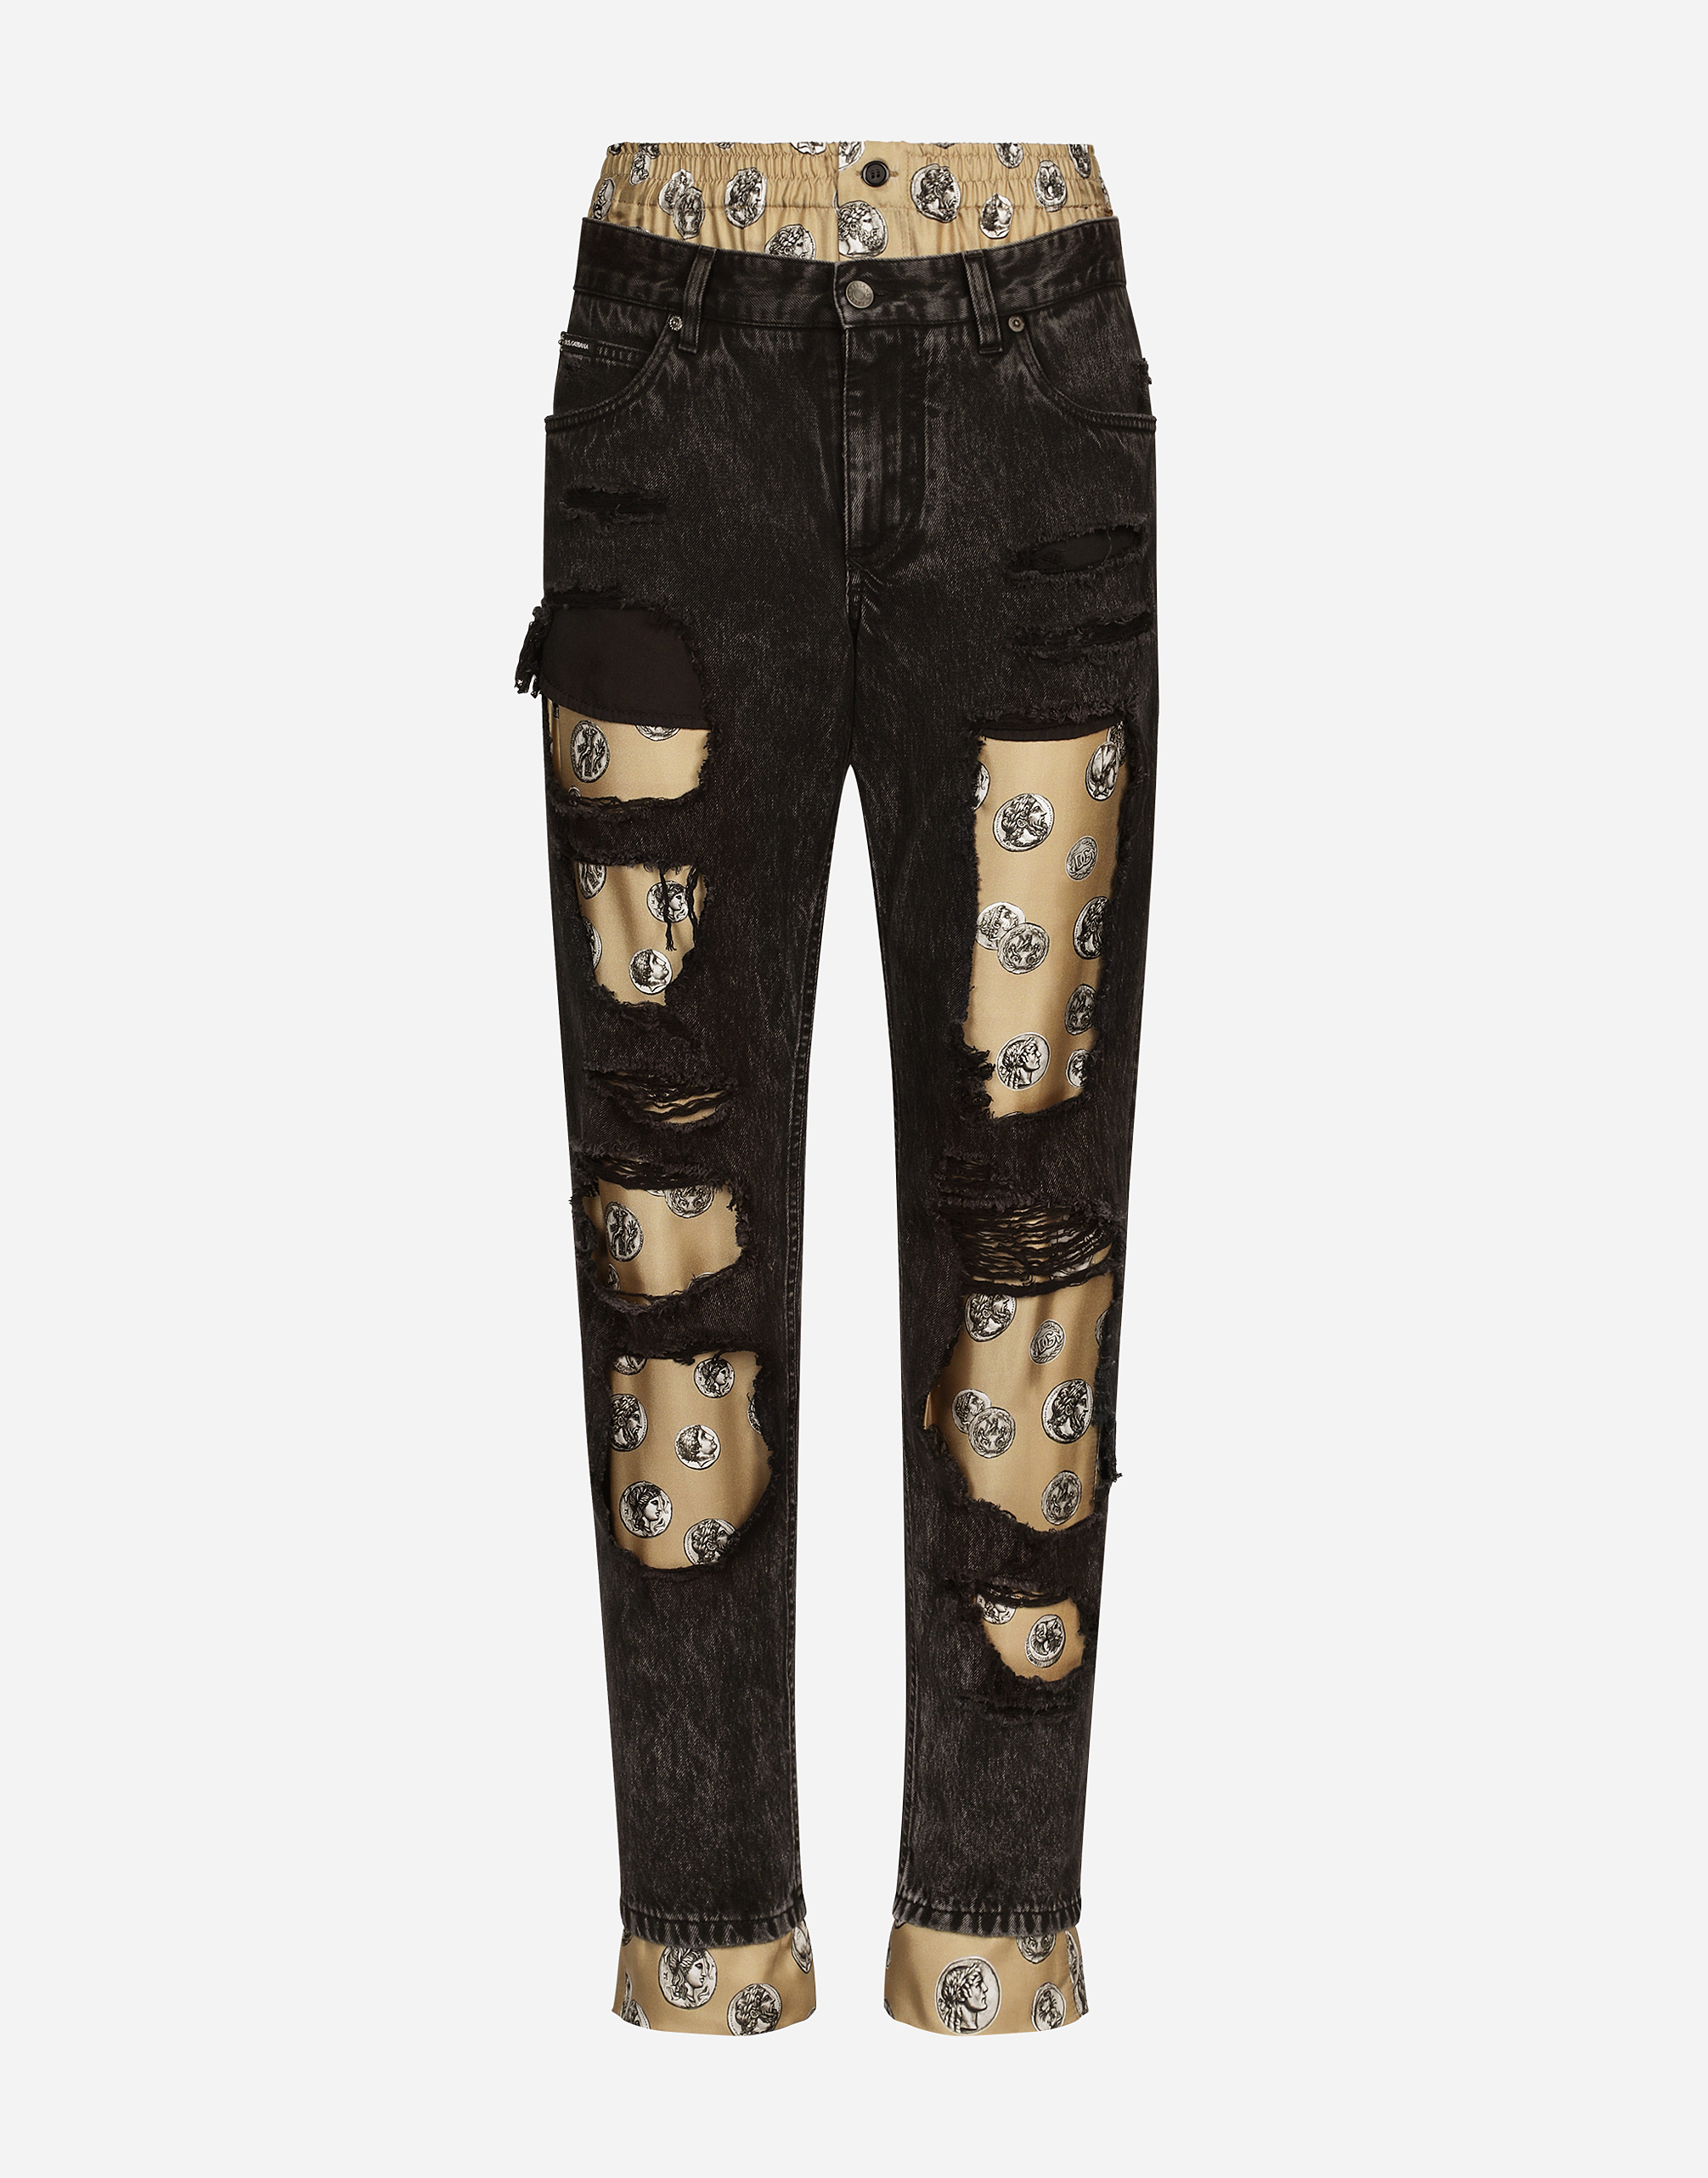 Jeans with coin print silk twill interior in Multicolor